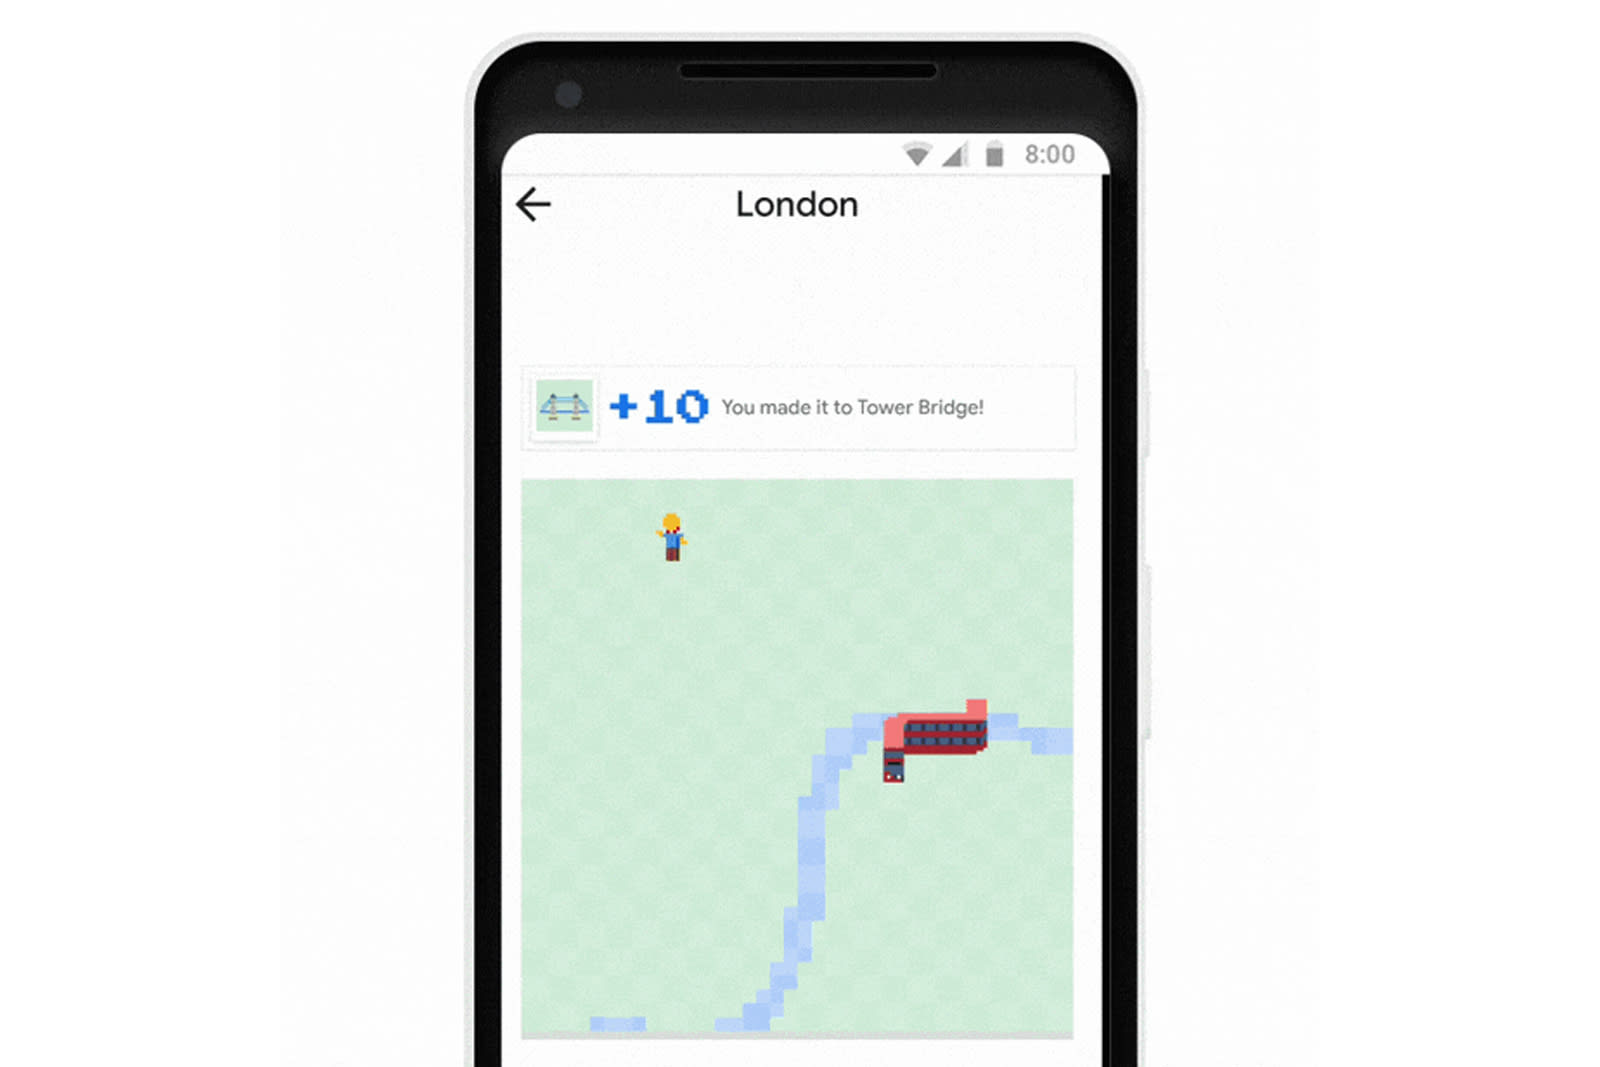 Google Maps adds a city-themed 'Snake' game - Engadget